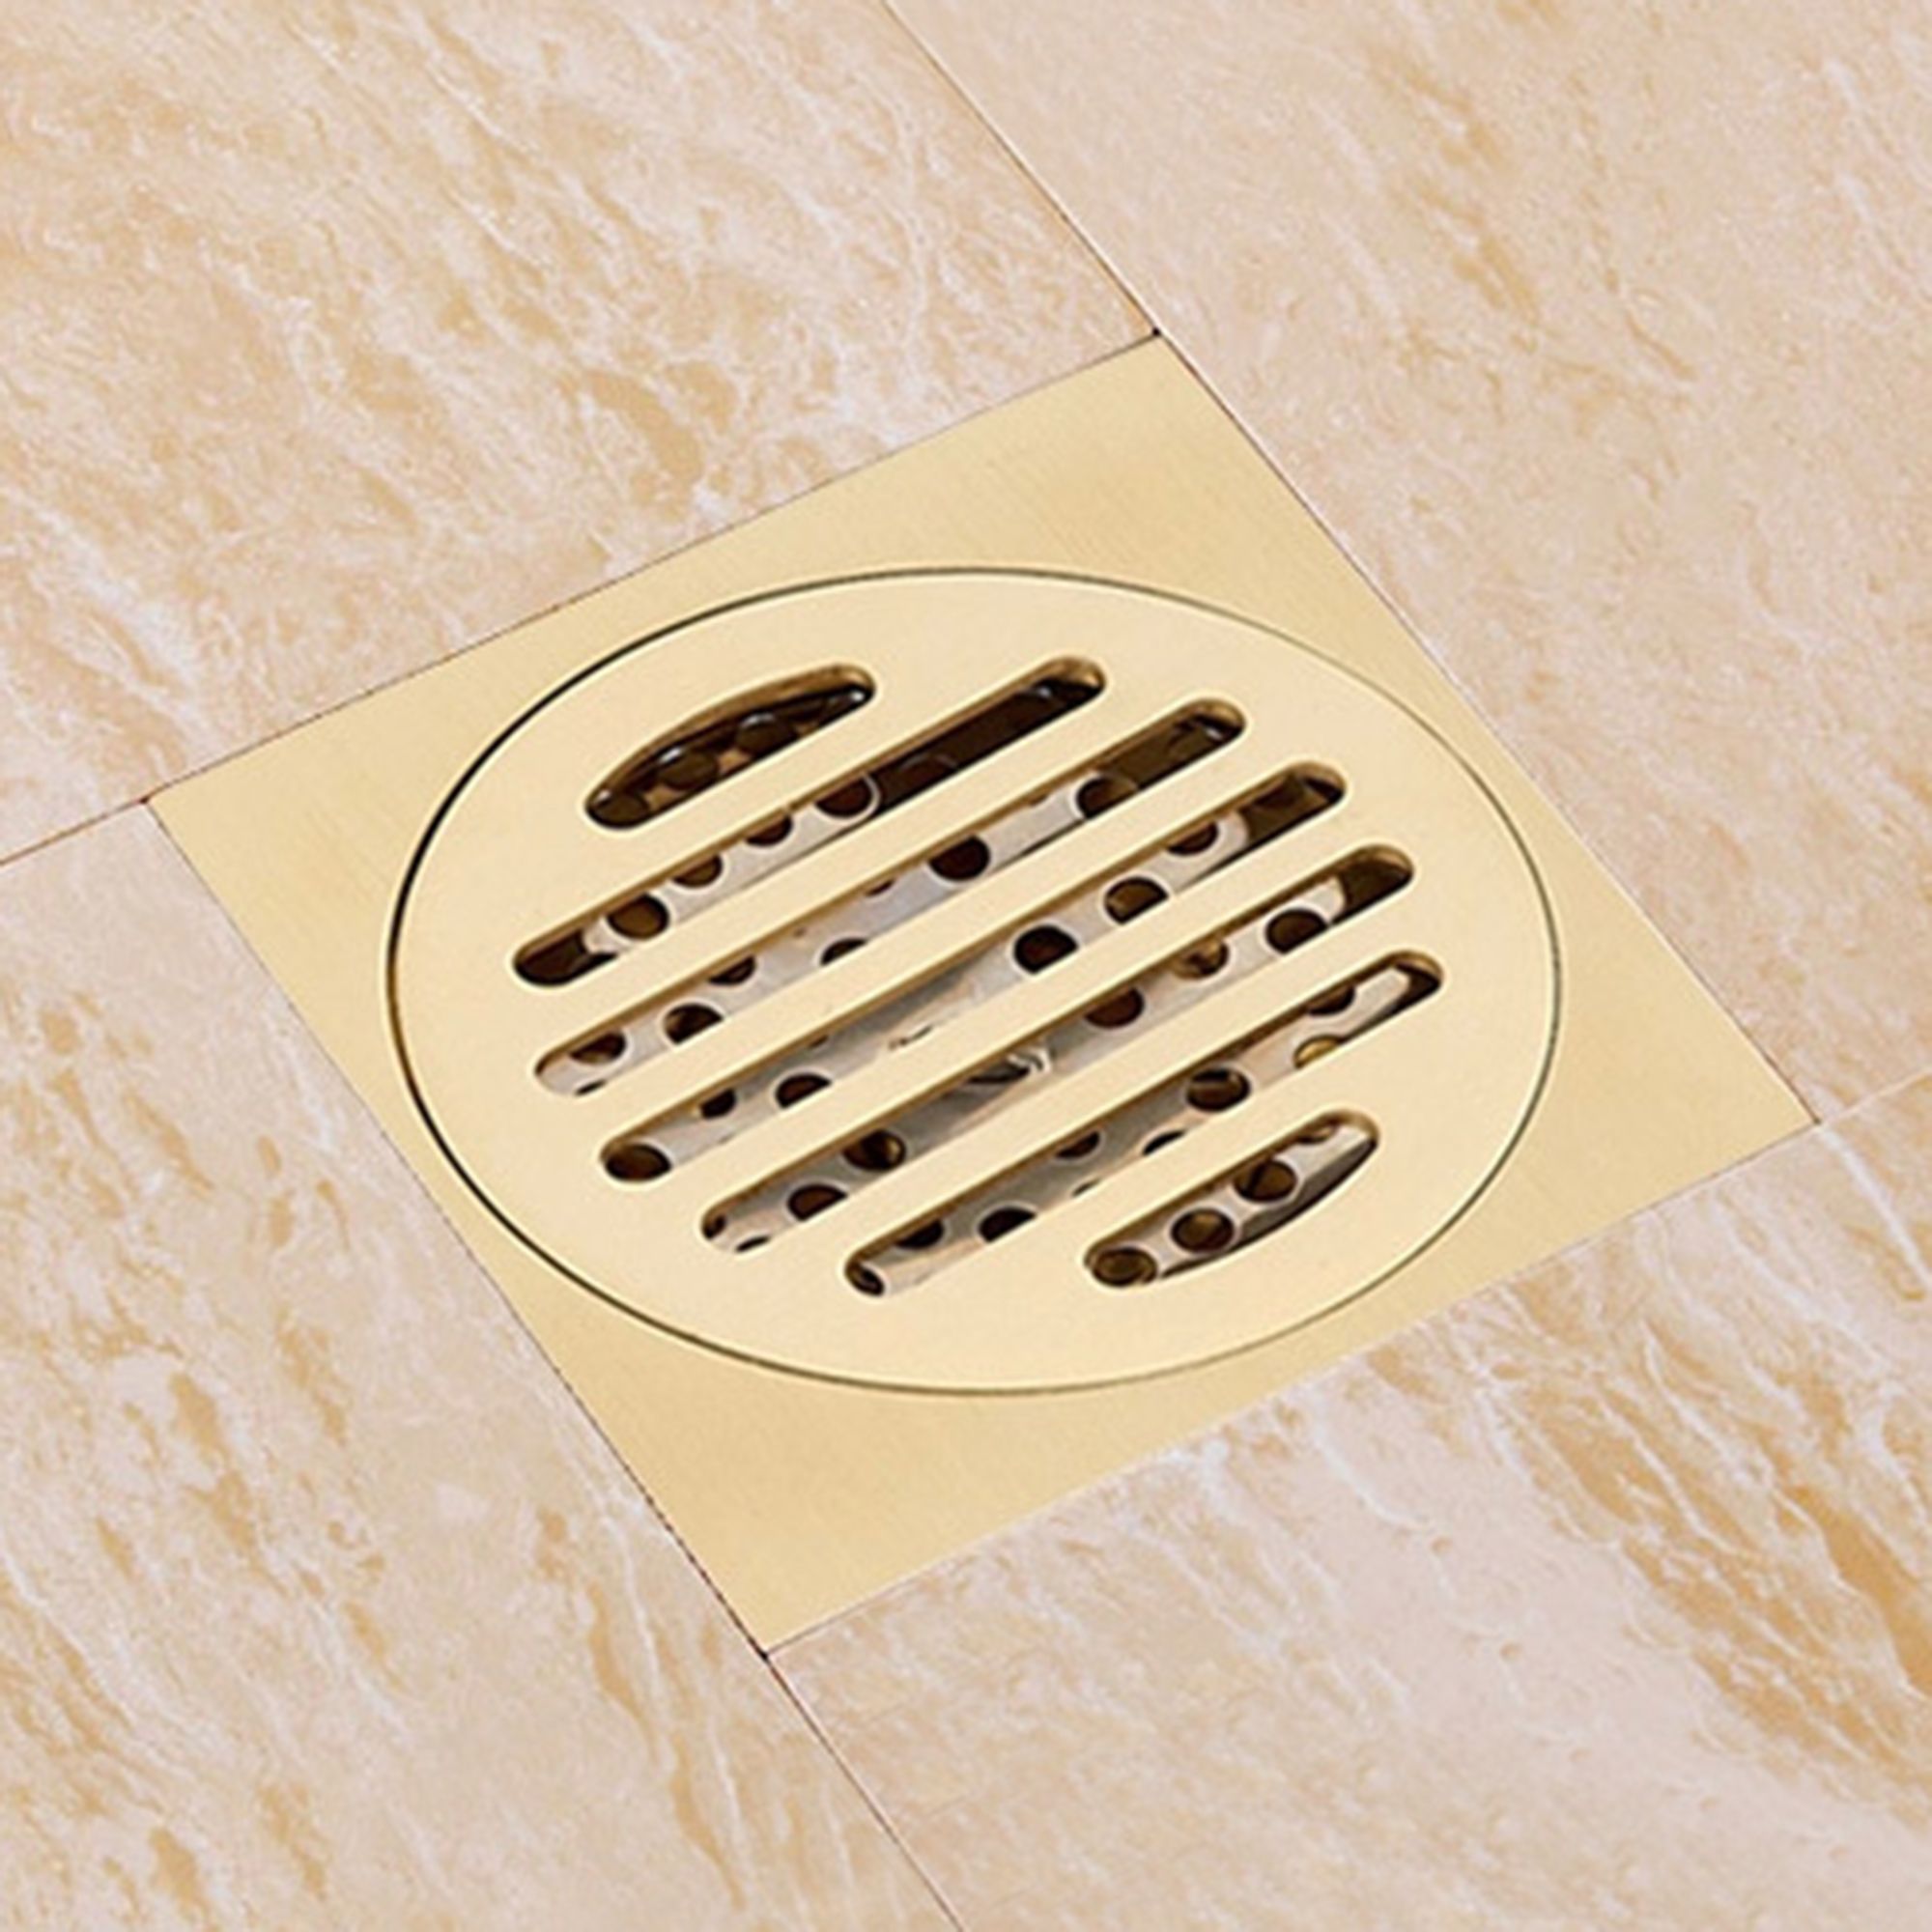 2019 Gold Finish Solid Brass Square 4 Bathroom Floor Drain Shower Drainer Waste With Single